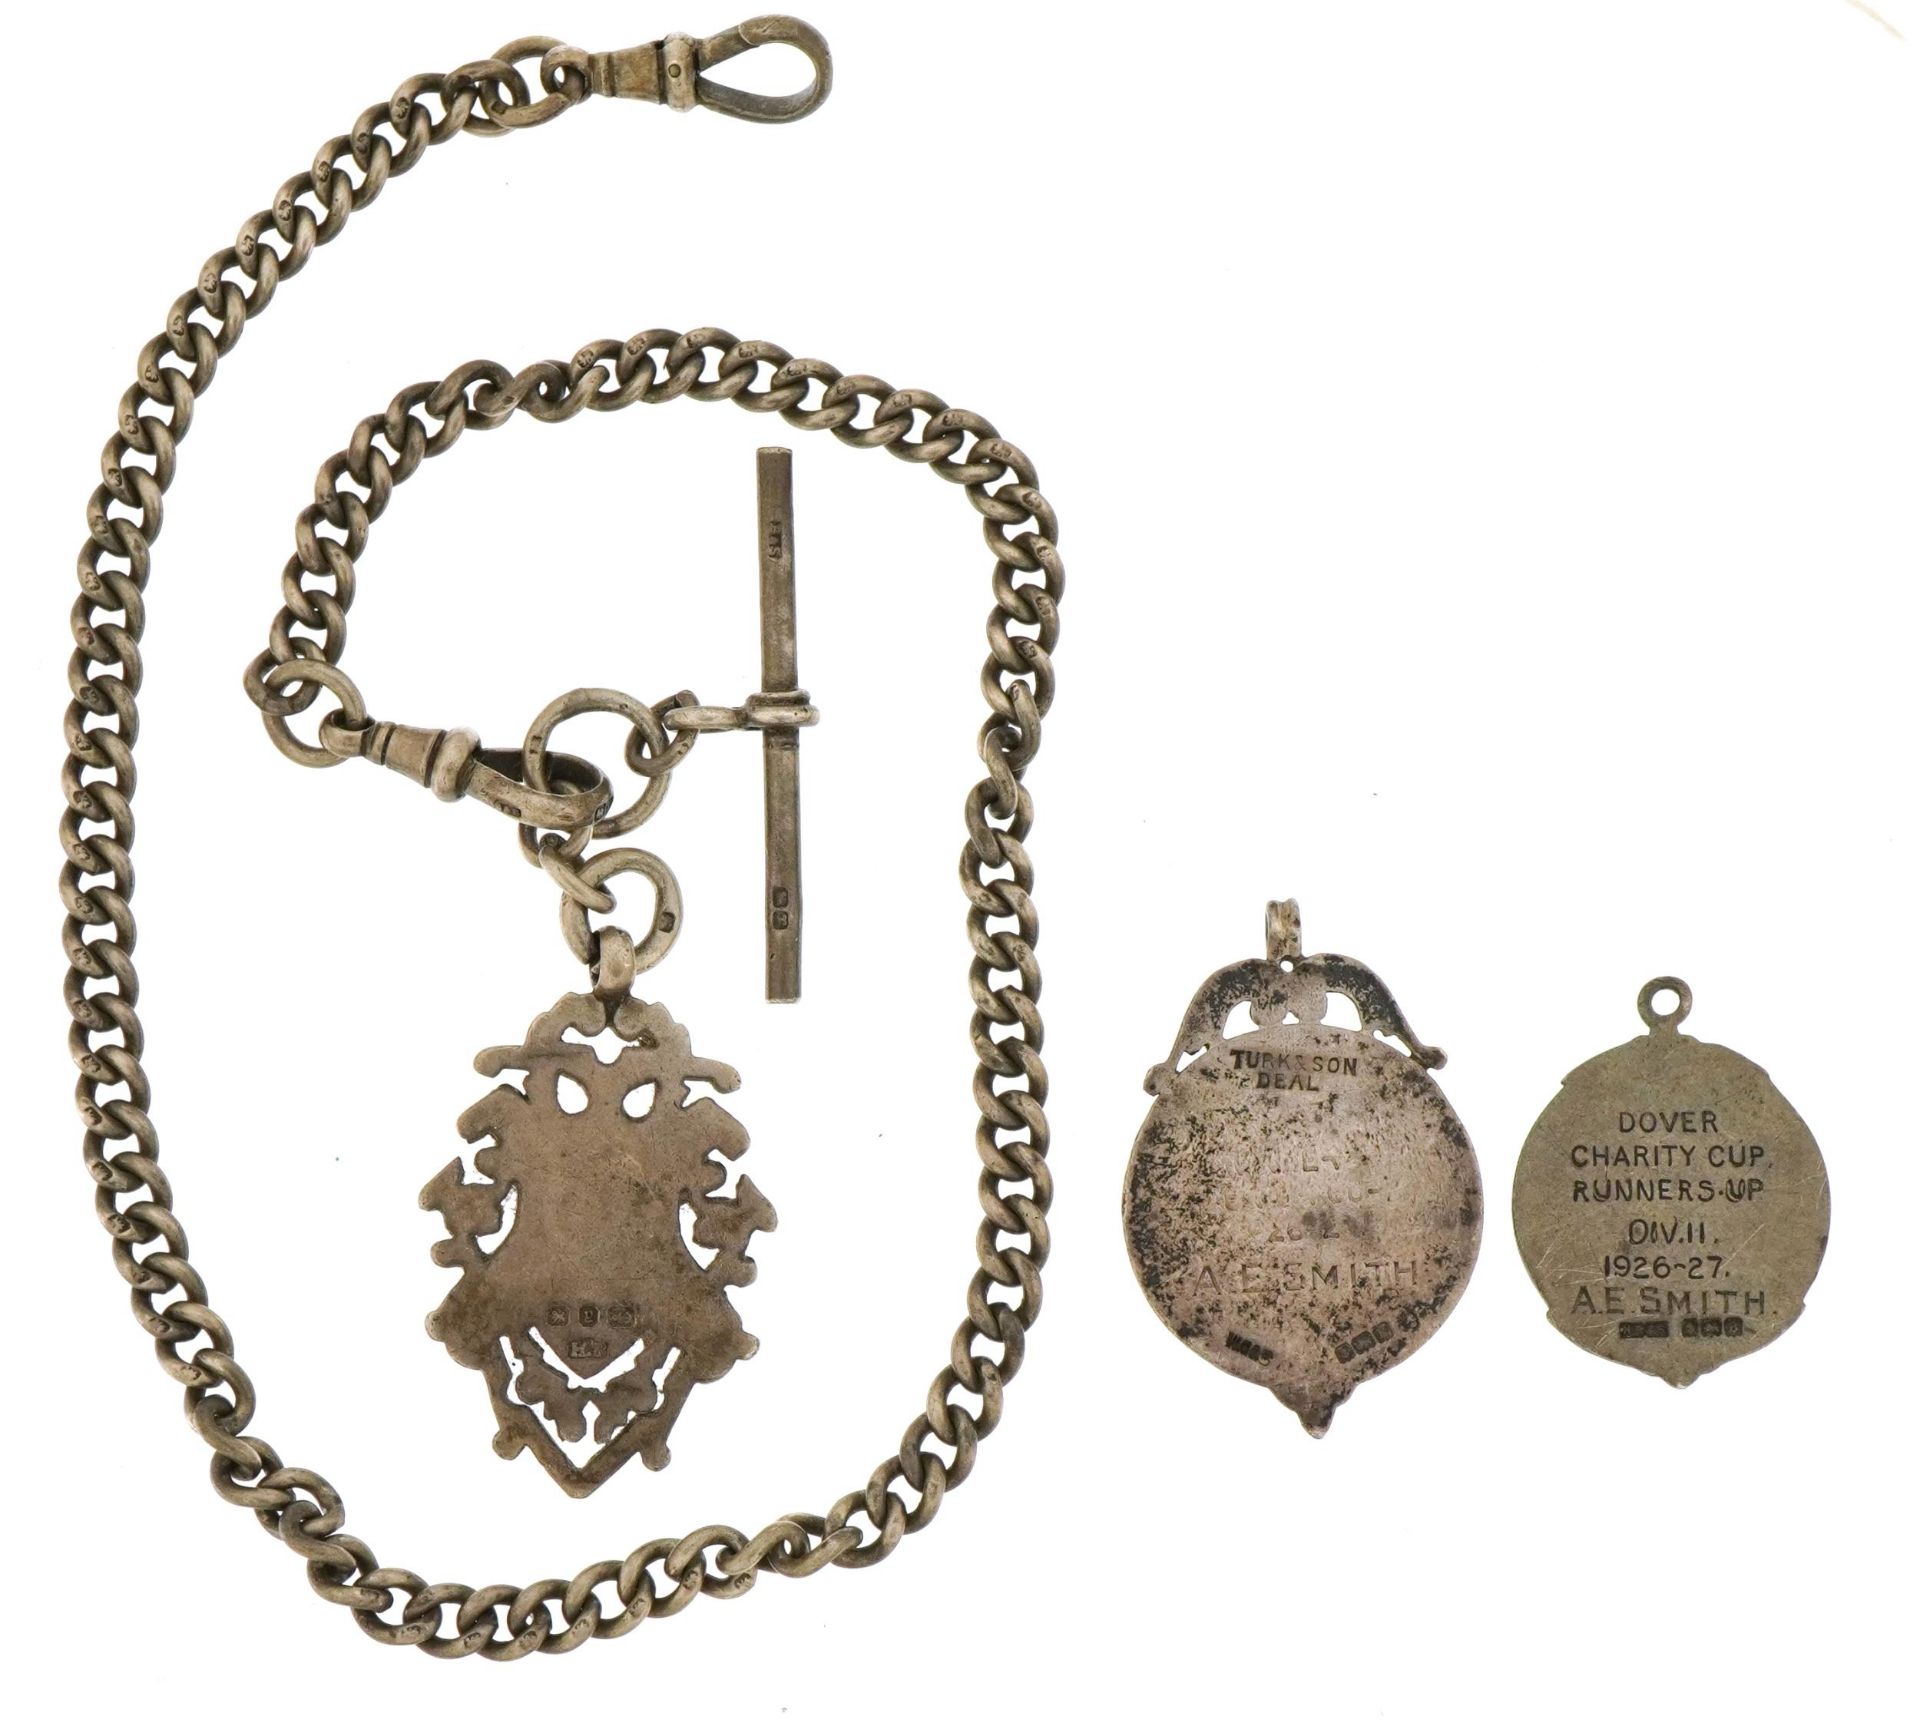 Victorian silver watch chain, T bar and jewel and two others including Dover Charity Cup 1926-27, - Image 3 of 3